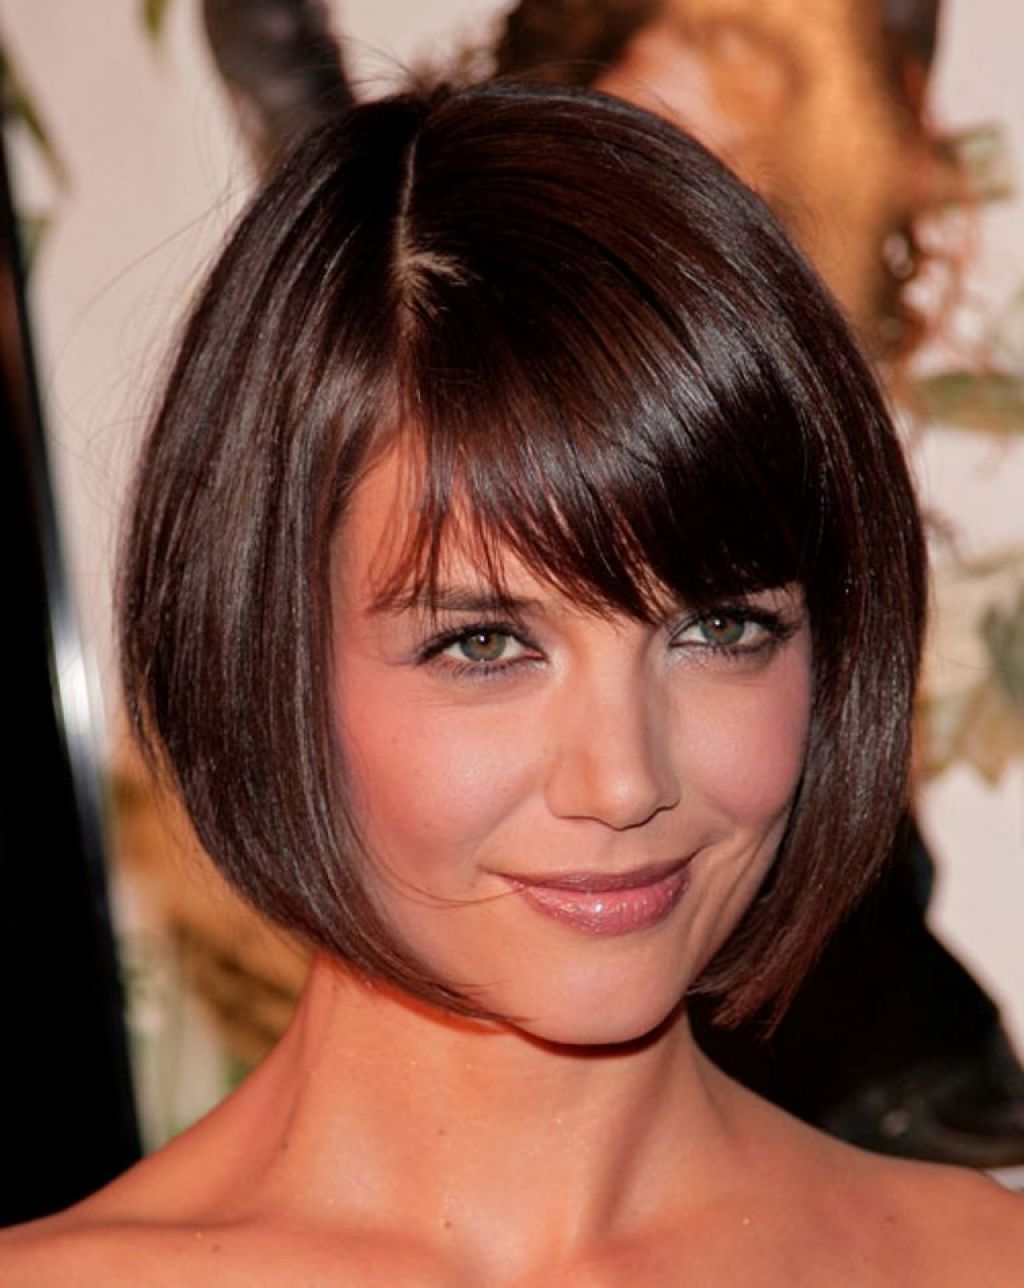 Short Hairstyles For Thick Hair Square Face | Hair!! | Pinterest Pertaining To Short Hairstyles For Square Face (View 16 of 25)